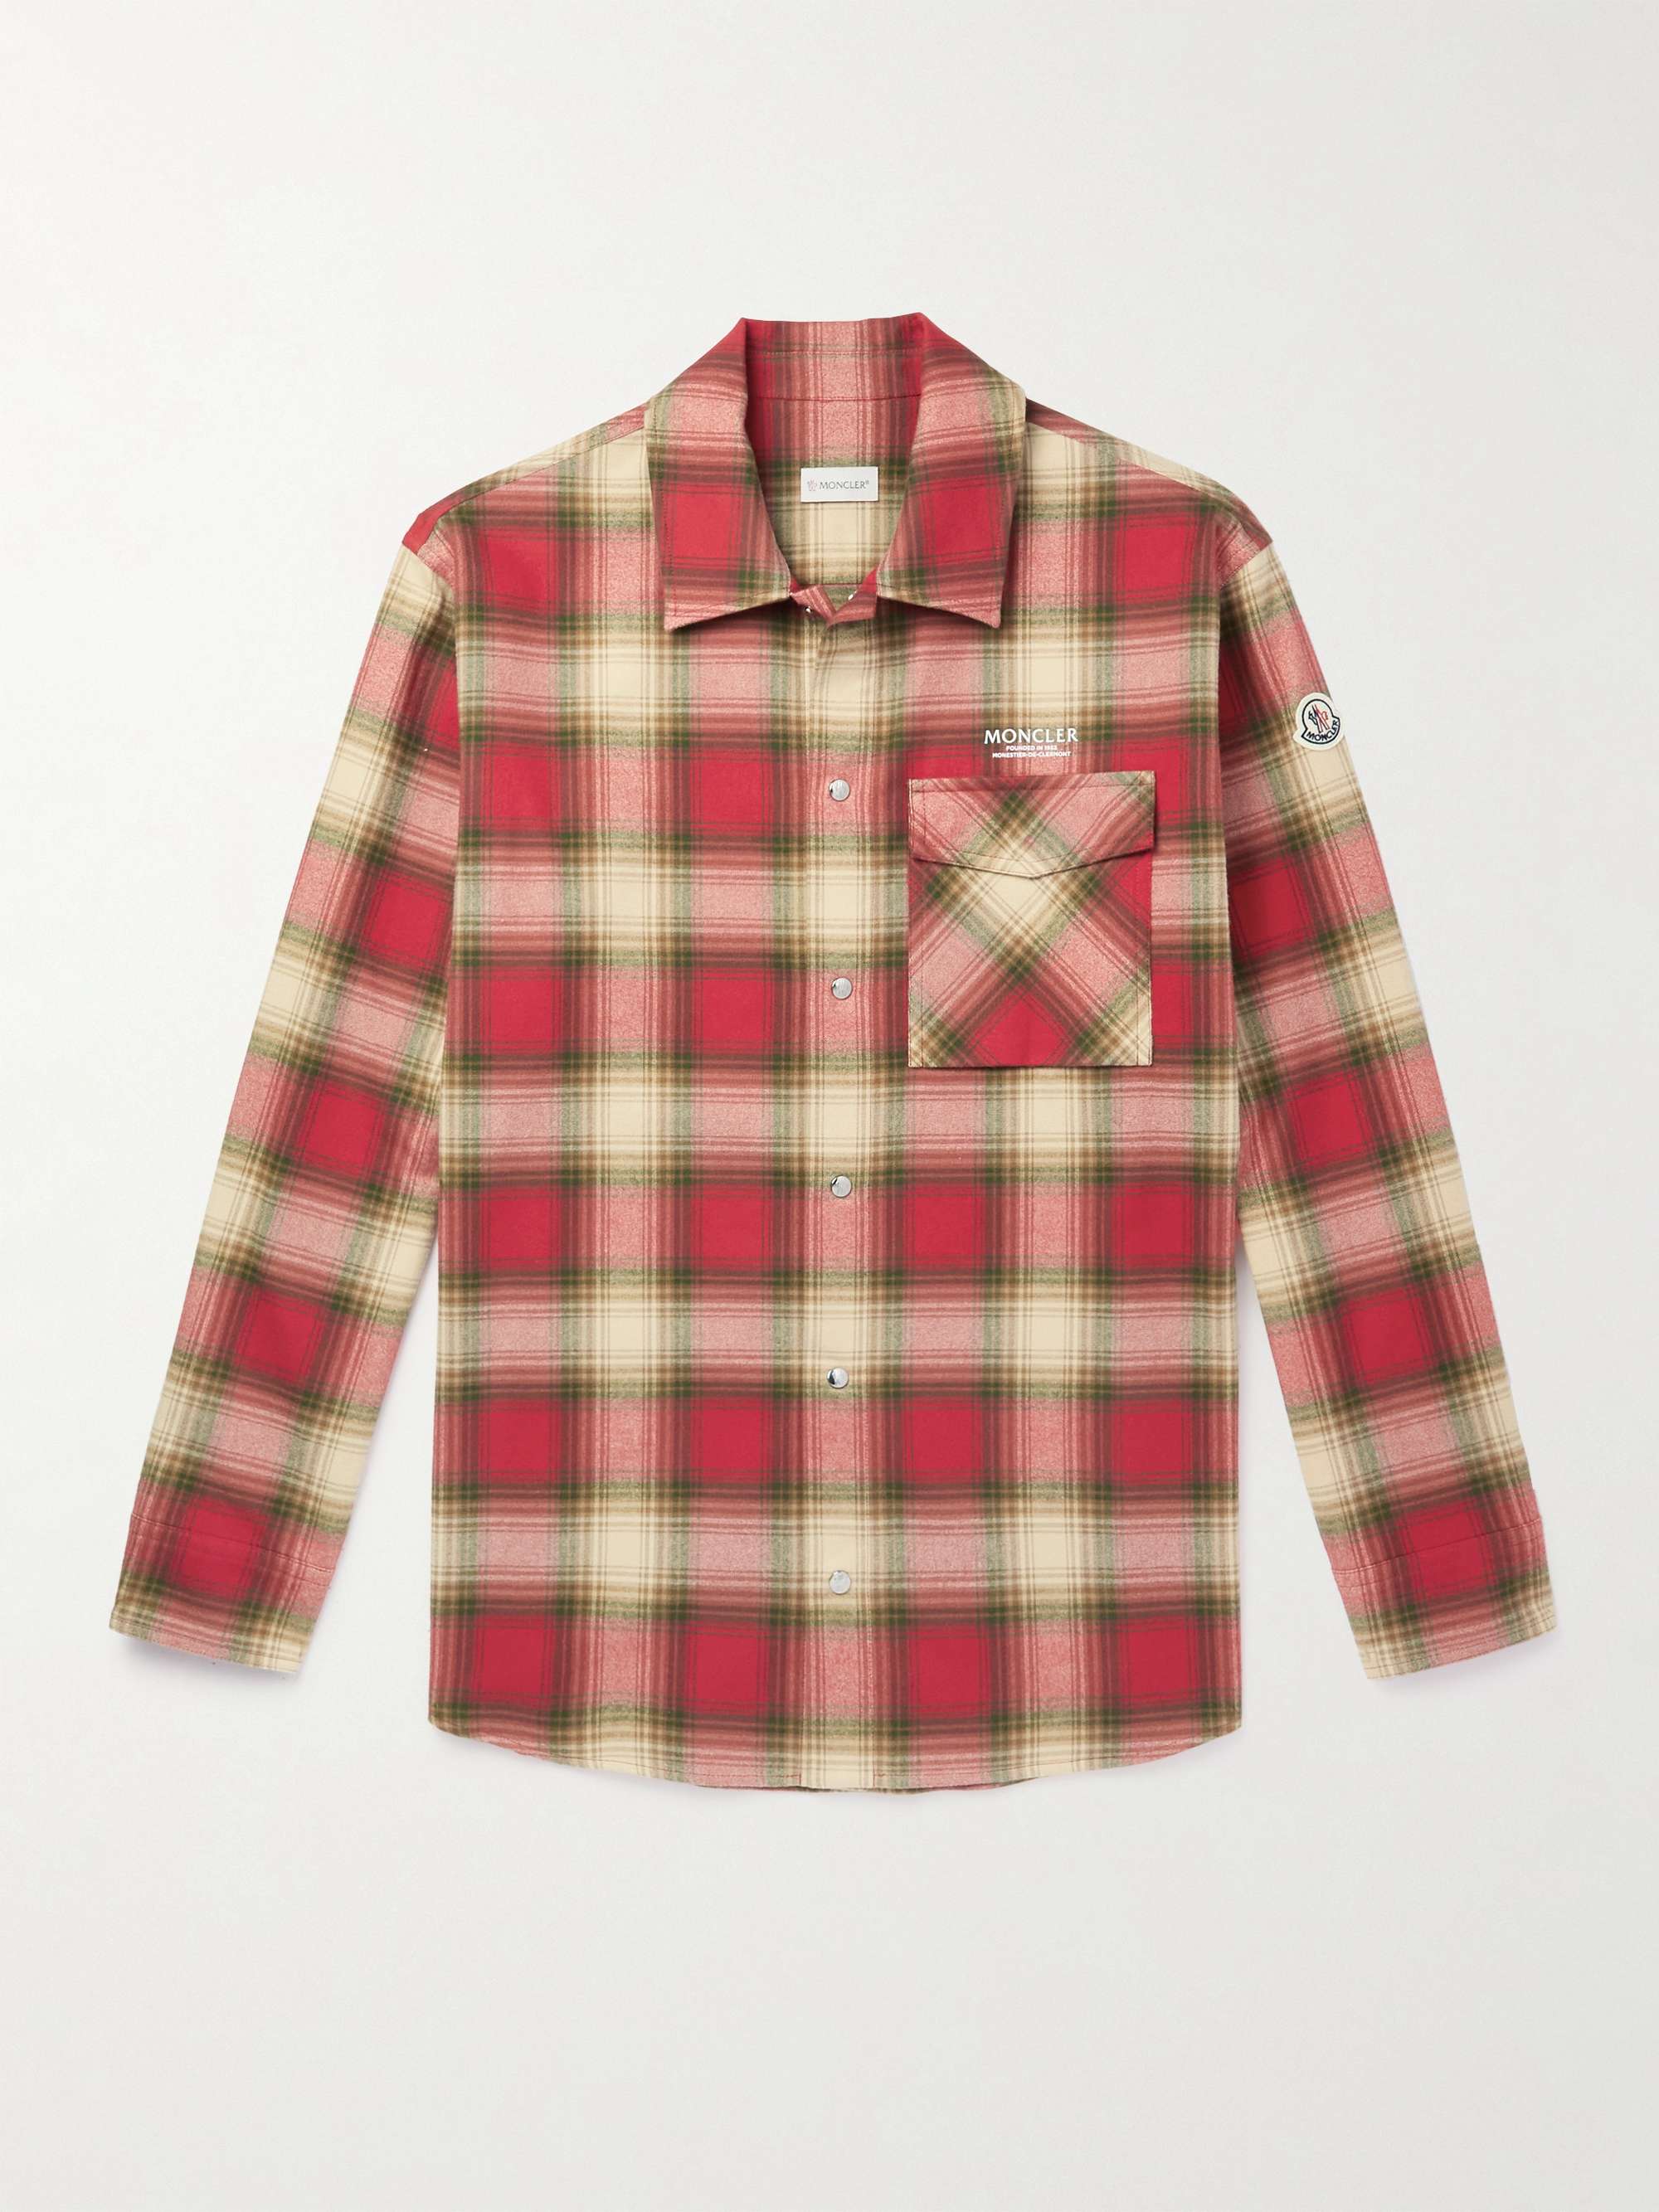 Red Checked Cotton-Flannel Shirt | MONCLER | MR PORTER